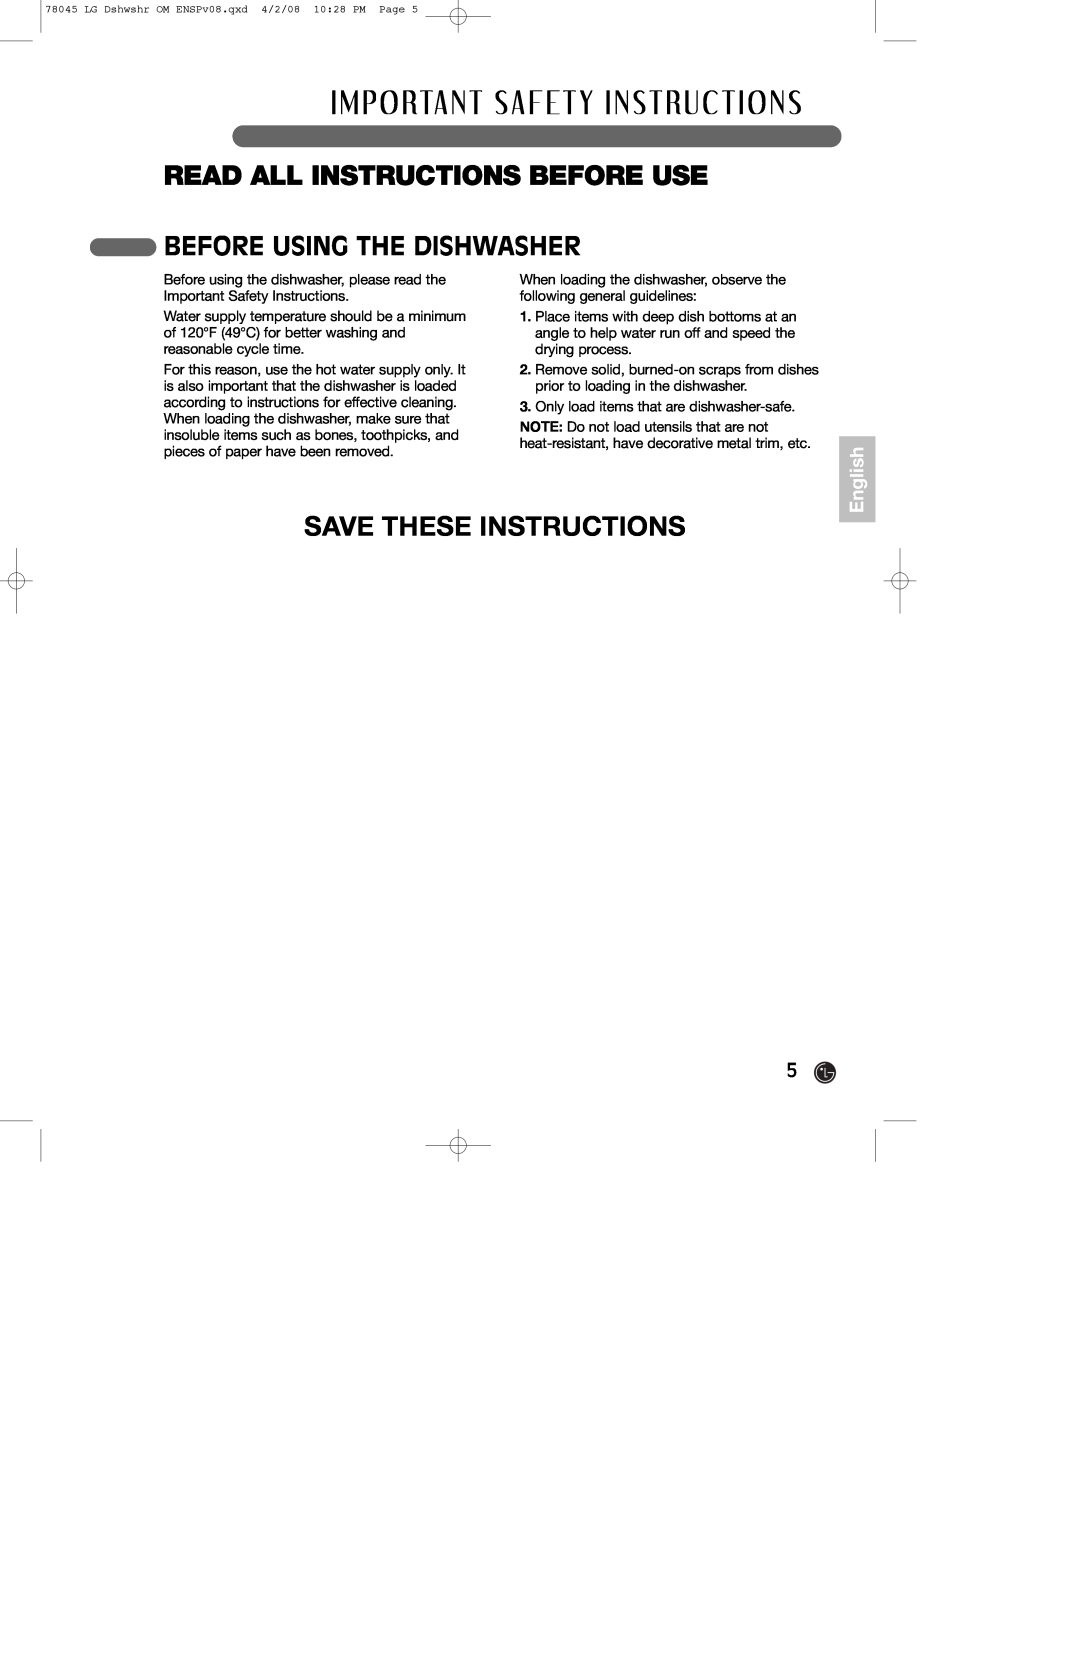 LG Electronics LDF6920ST Save These Instructions, Before Using The Dishwasher, Read All Instructions Before Use, English 